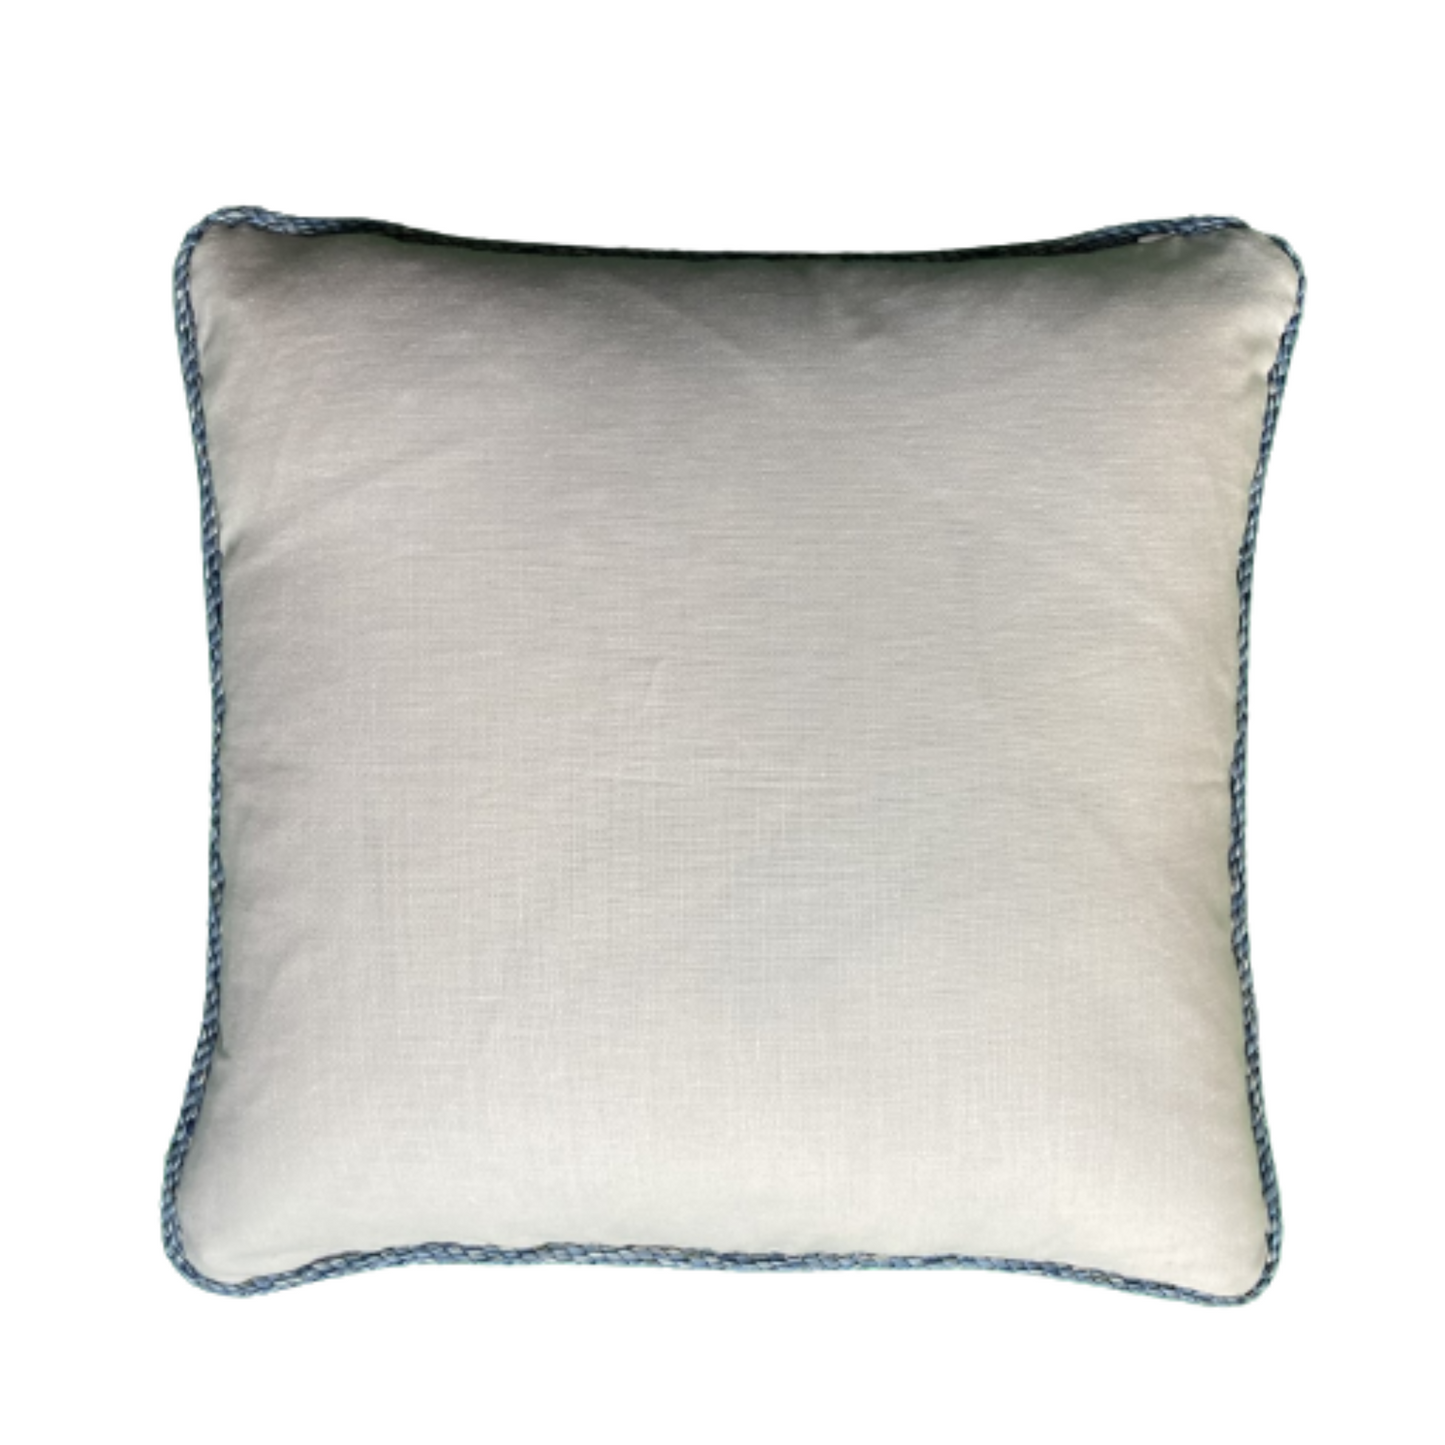 Chinoiserie Blue and White Ceramics 20 x 20 Square Designer Pillow with Down Feather Insert